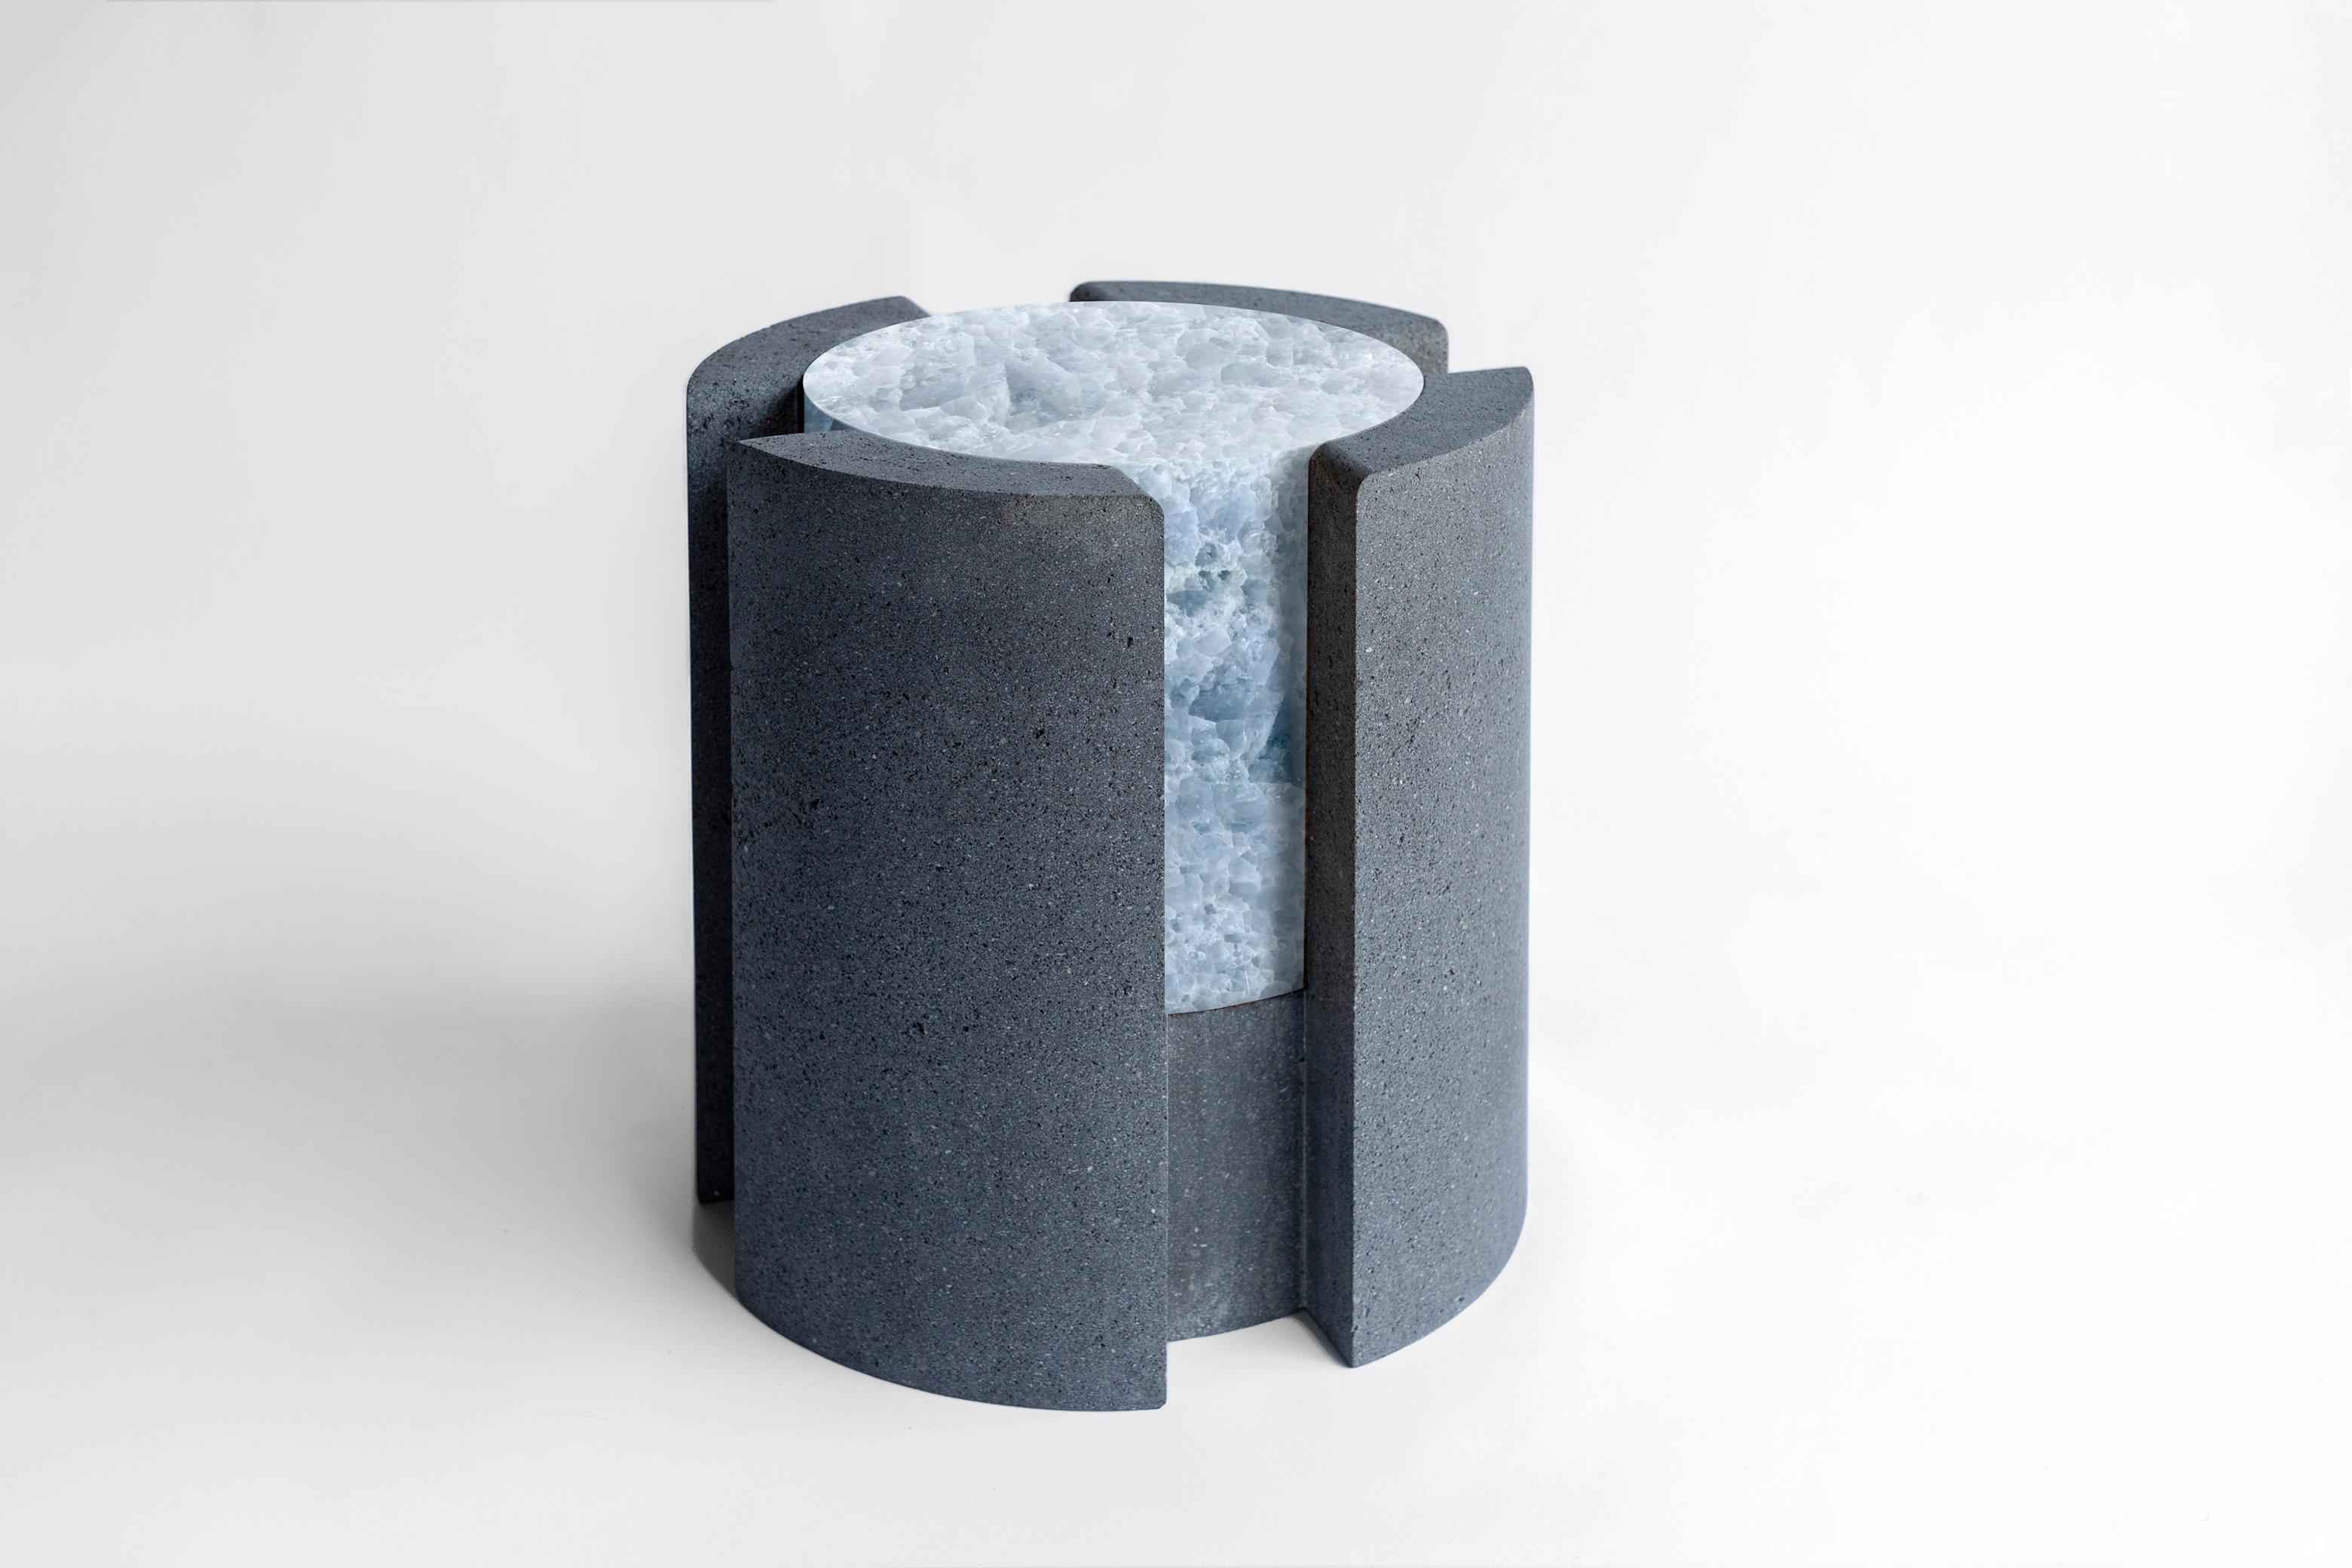 Volcanic Shade III Stool/Table by Sten Studio, Represented by Tuleste Factory For Sale 1